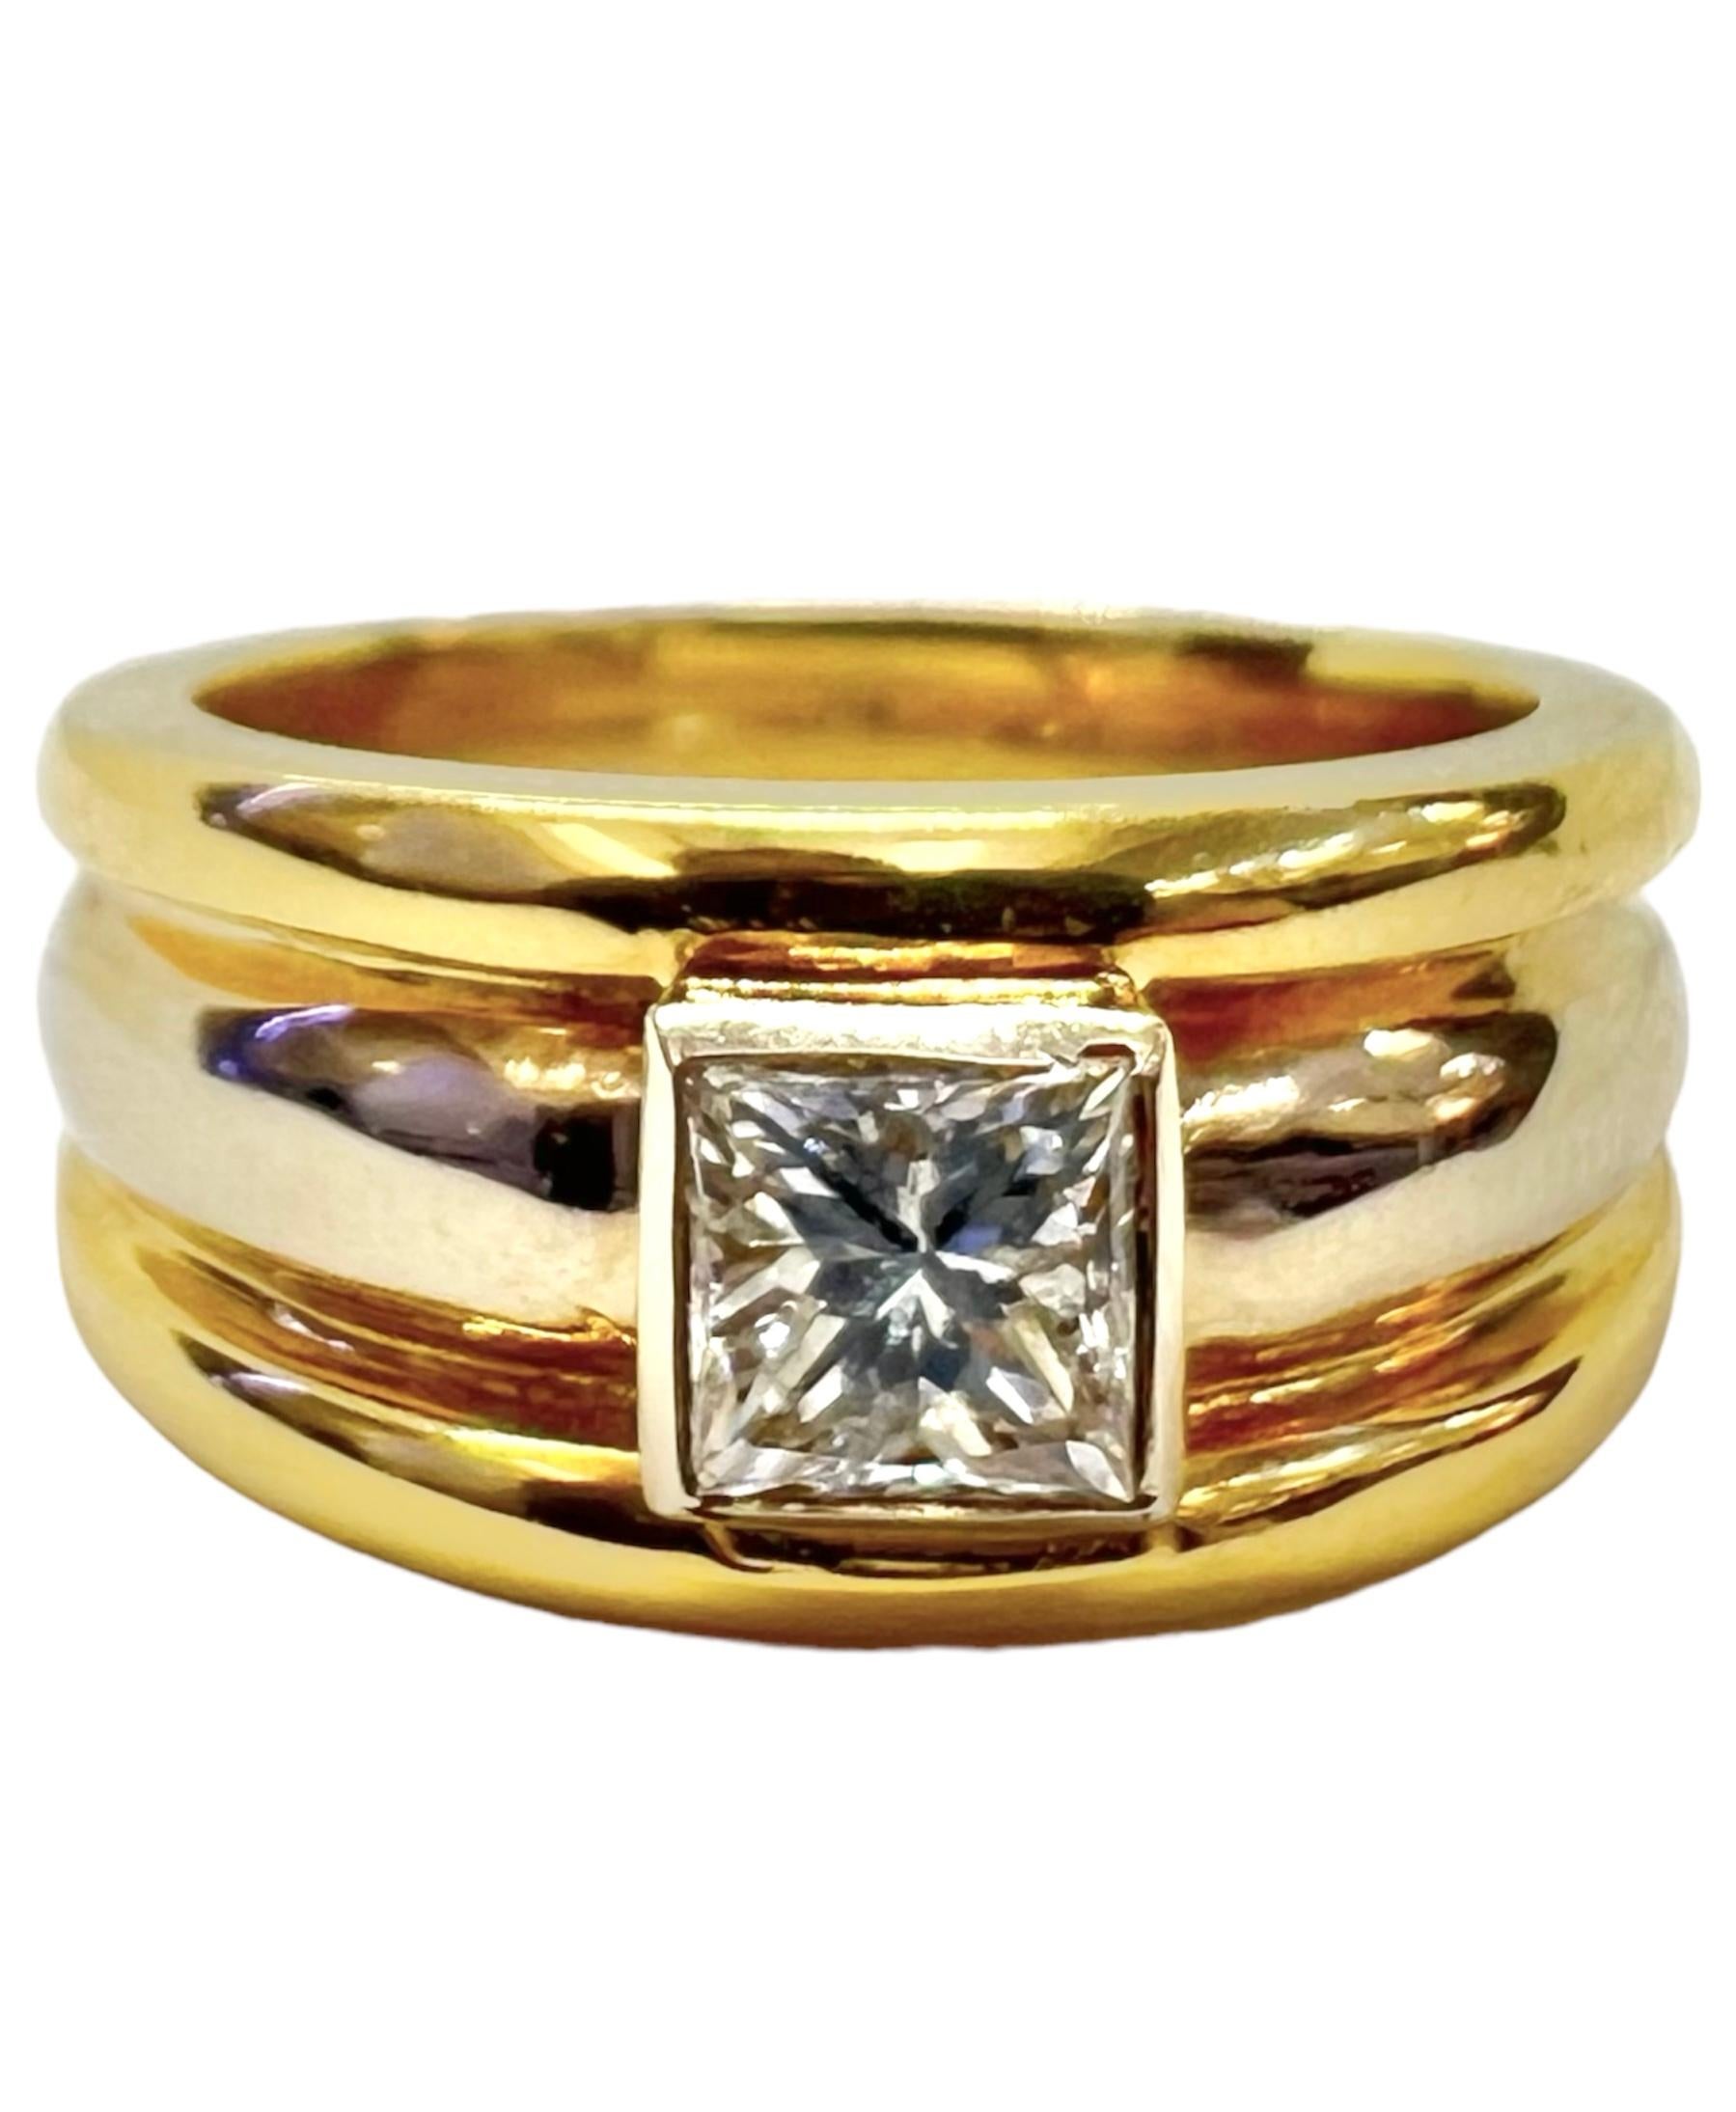 18K yellow gold with square cut diamond.

Sophia D by Joseph Dardashti LTD has been known worldwide for 35 years and are inspired by classic Art Deco design that merges with modern manufacturing techniques.  